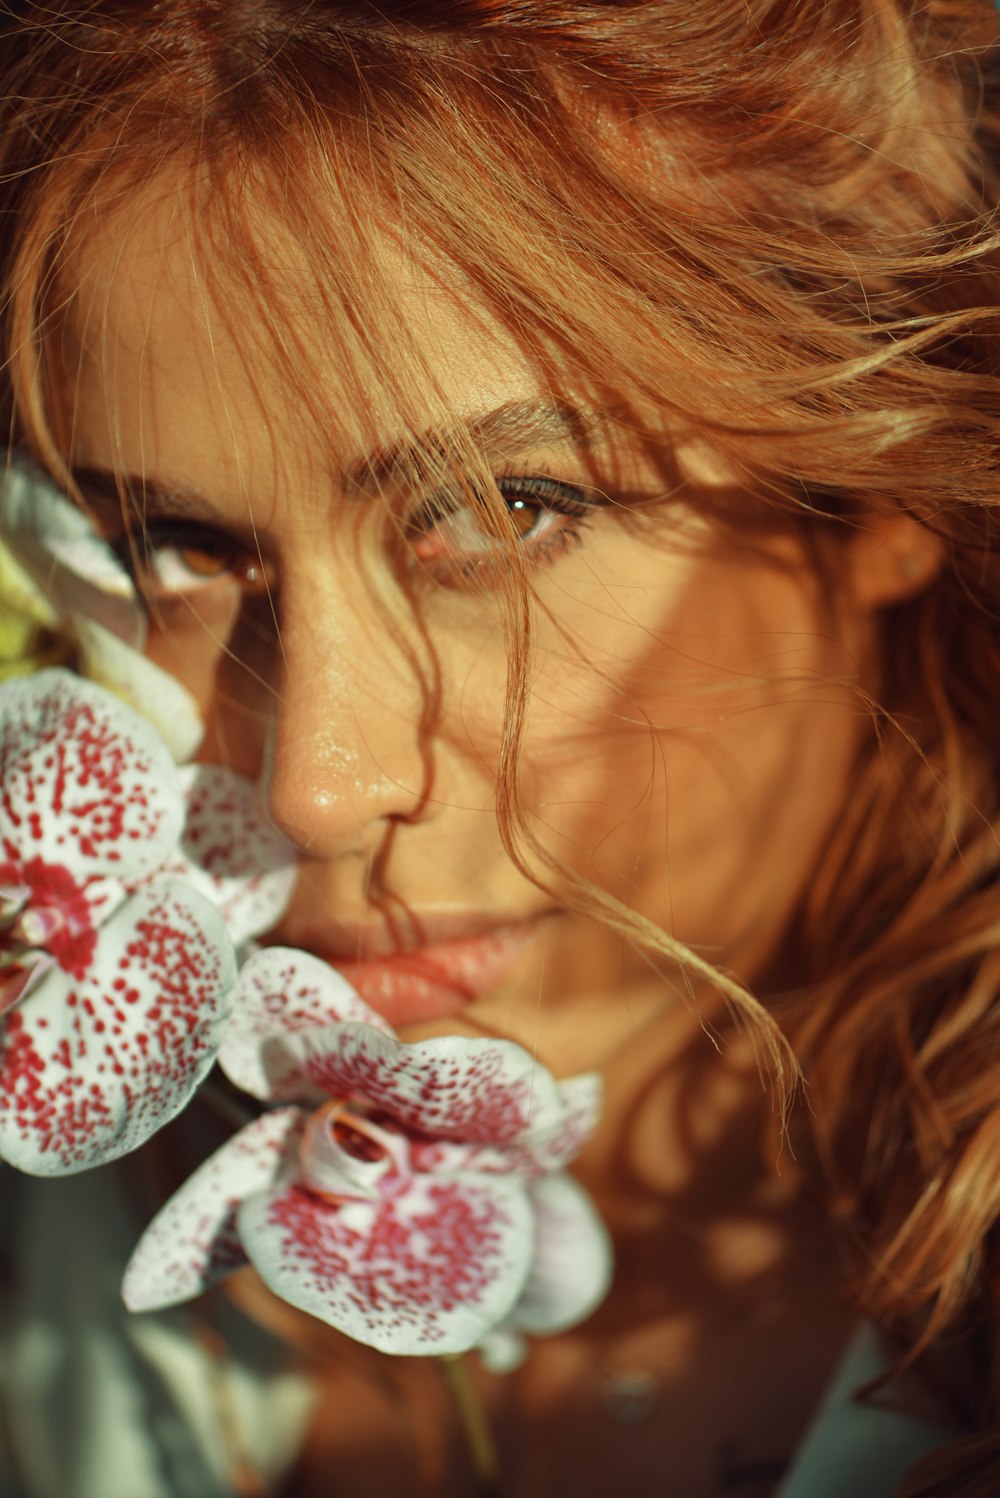 a close up of a woman with flowers in her hair